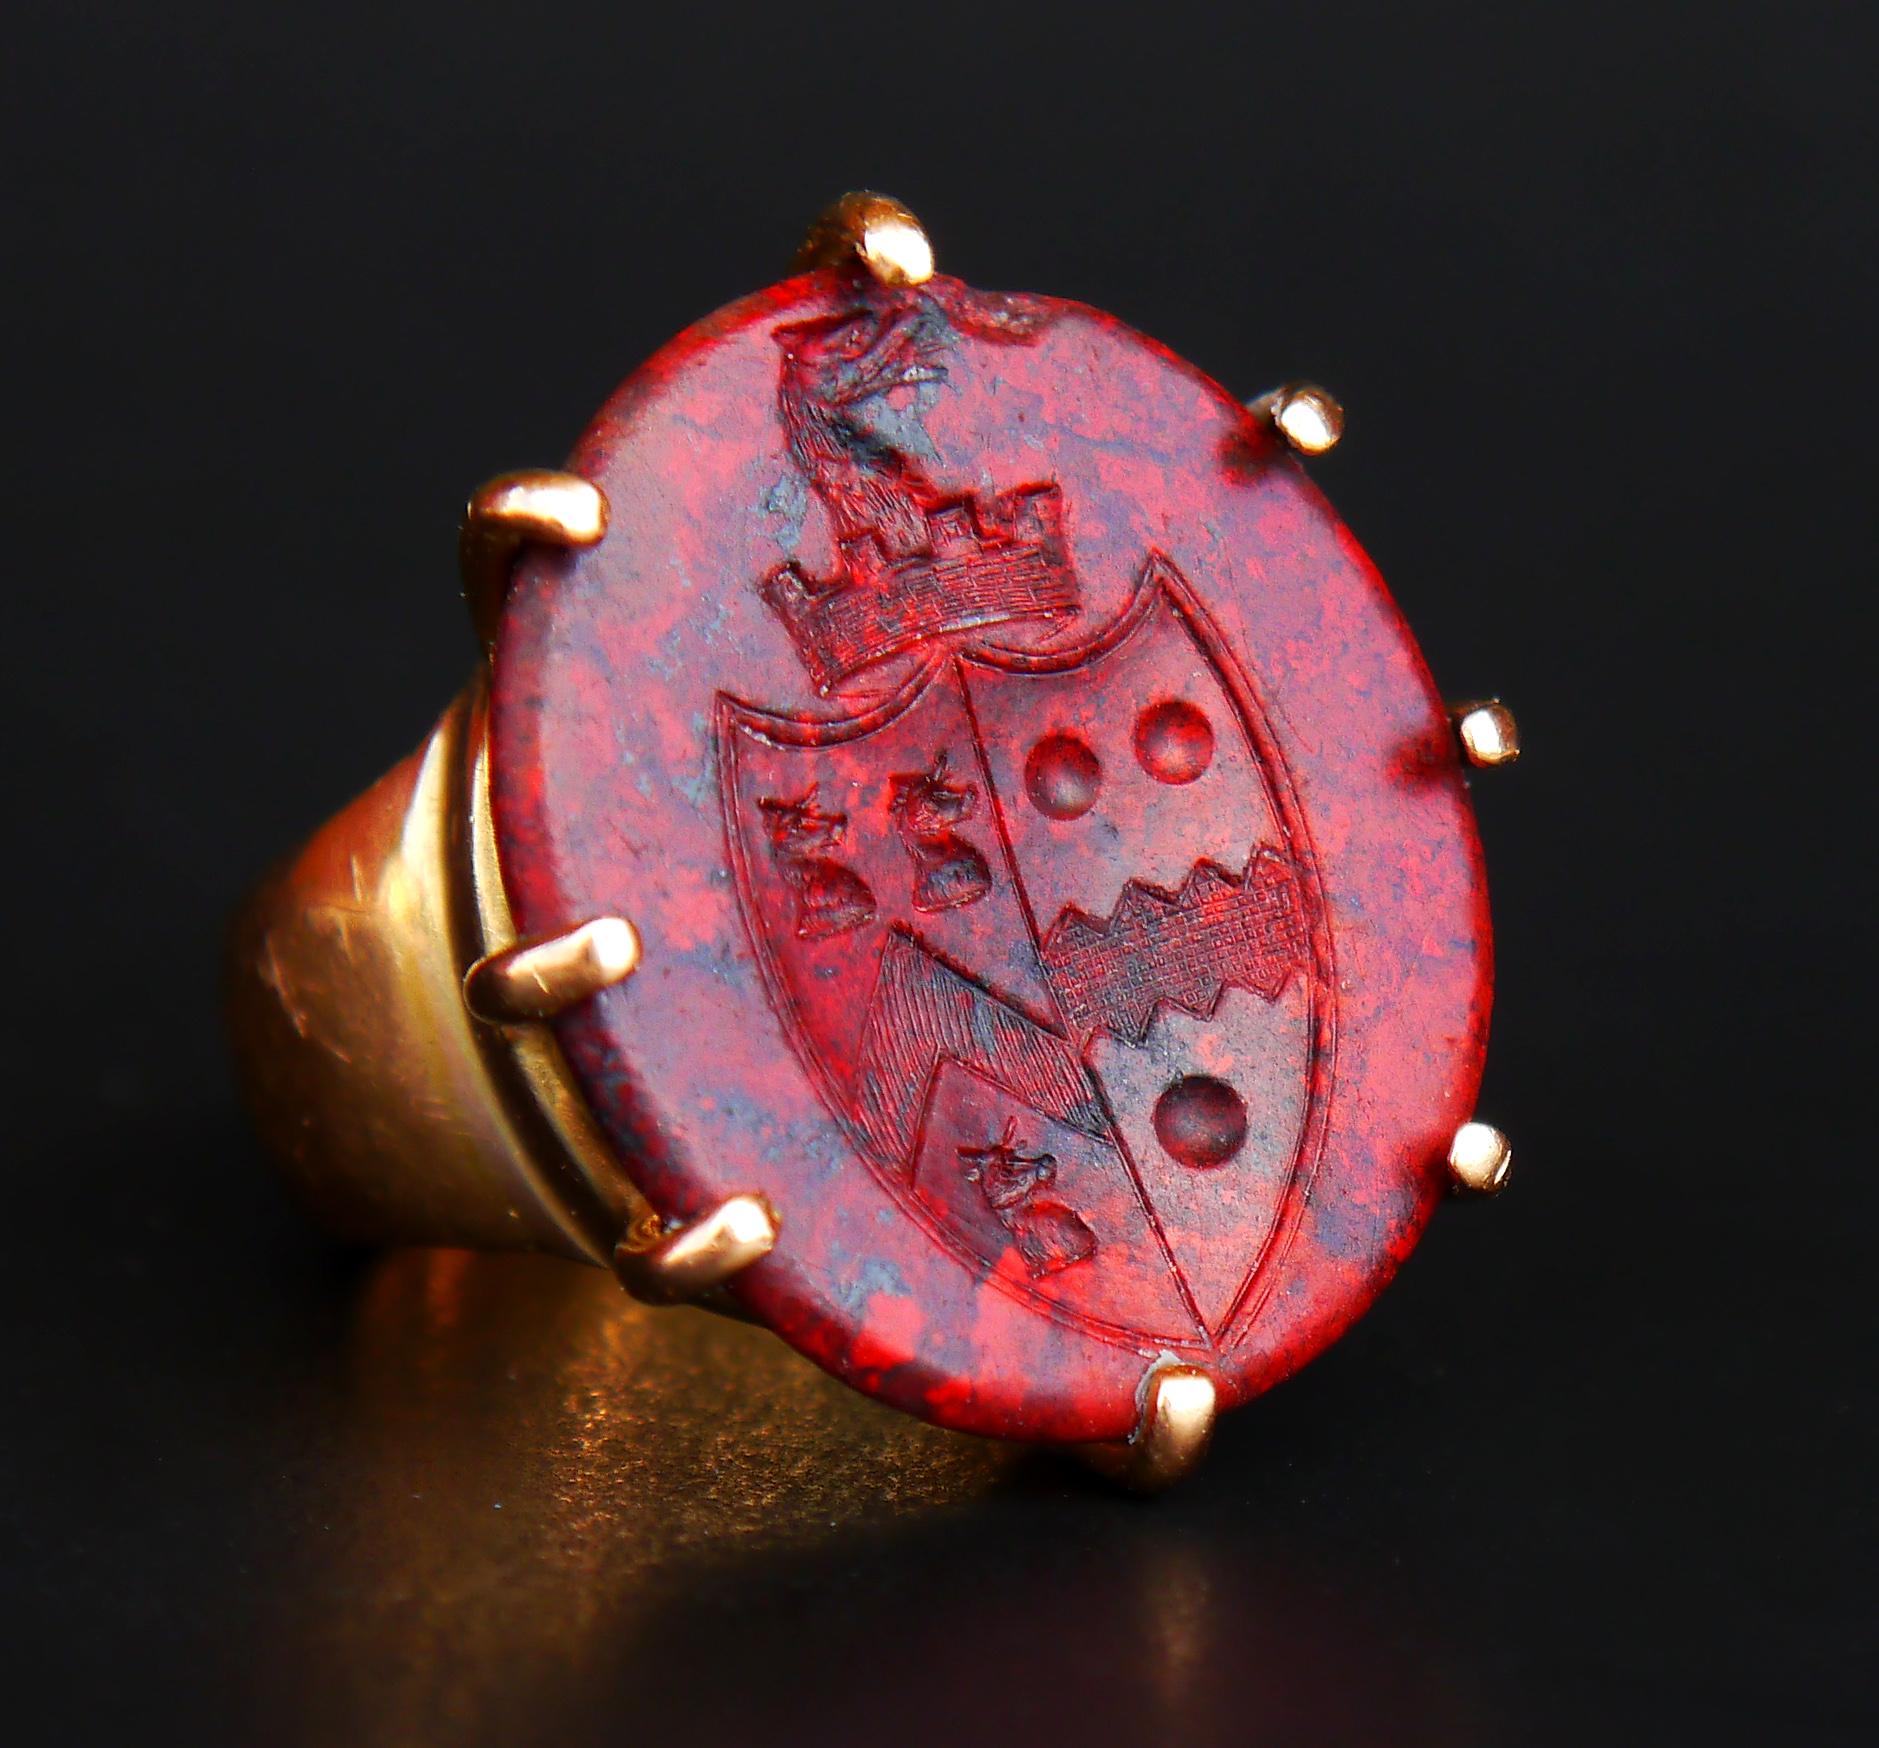 Gold and Jasper Signet Ring with concave shaped heraldic impalement Intaglio of two noble Families Coats of Arms forever embedded into the dark Red of the stone with great skill.

The texture of the stone a la spilled Blood congealing on Grey